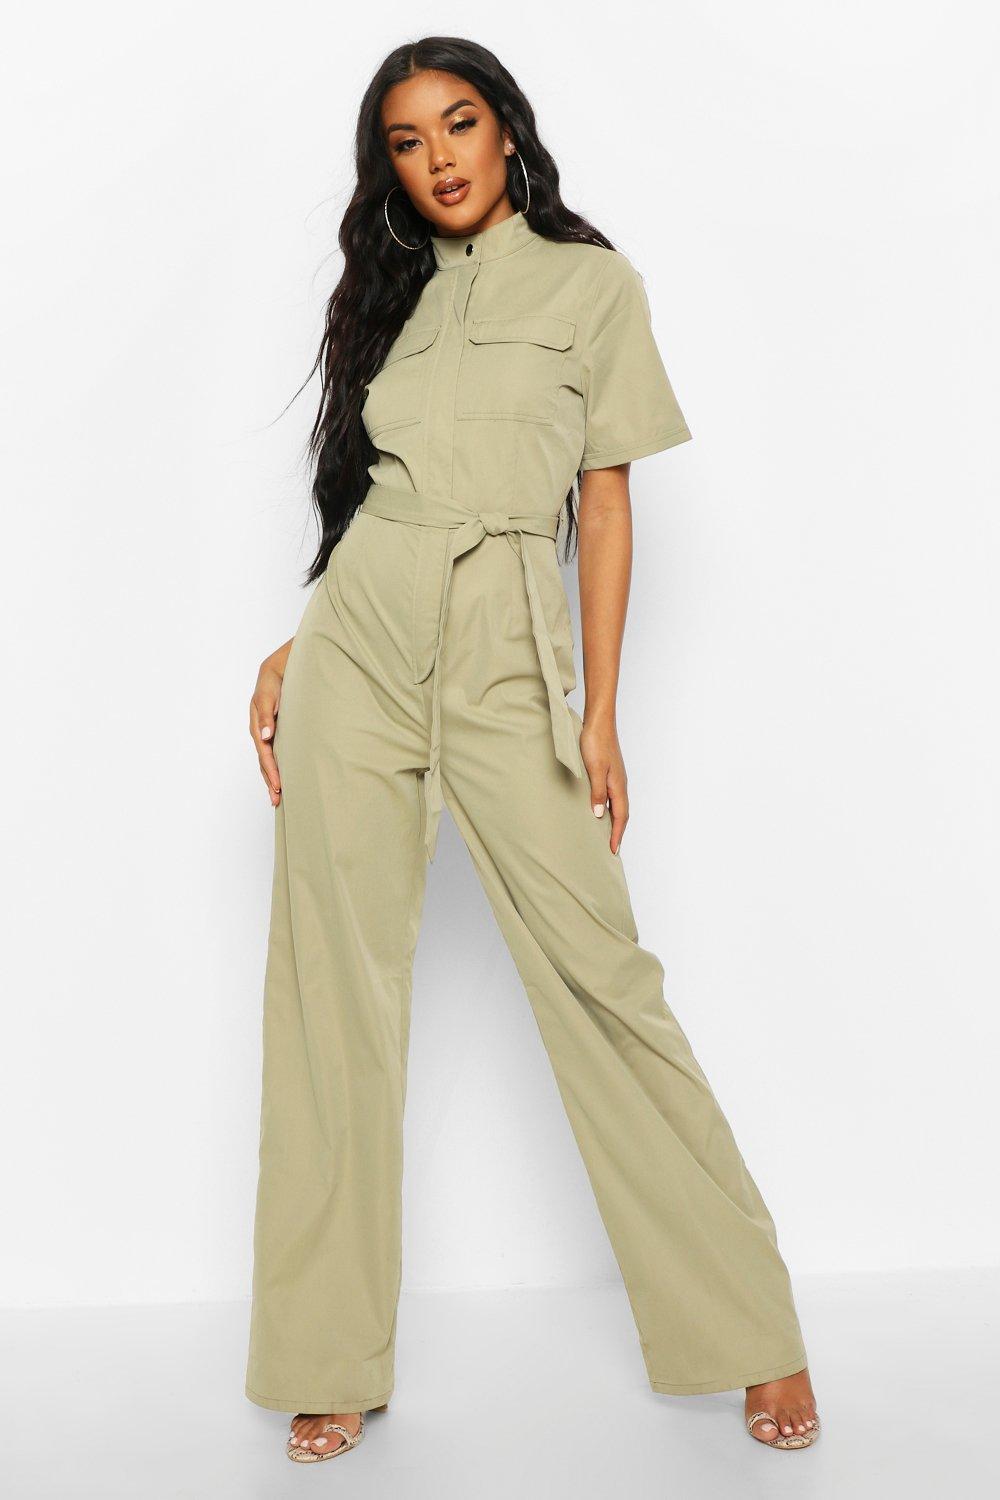 Boohoo Utility Jumpsuit Outlet, 58% OFF ...